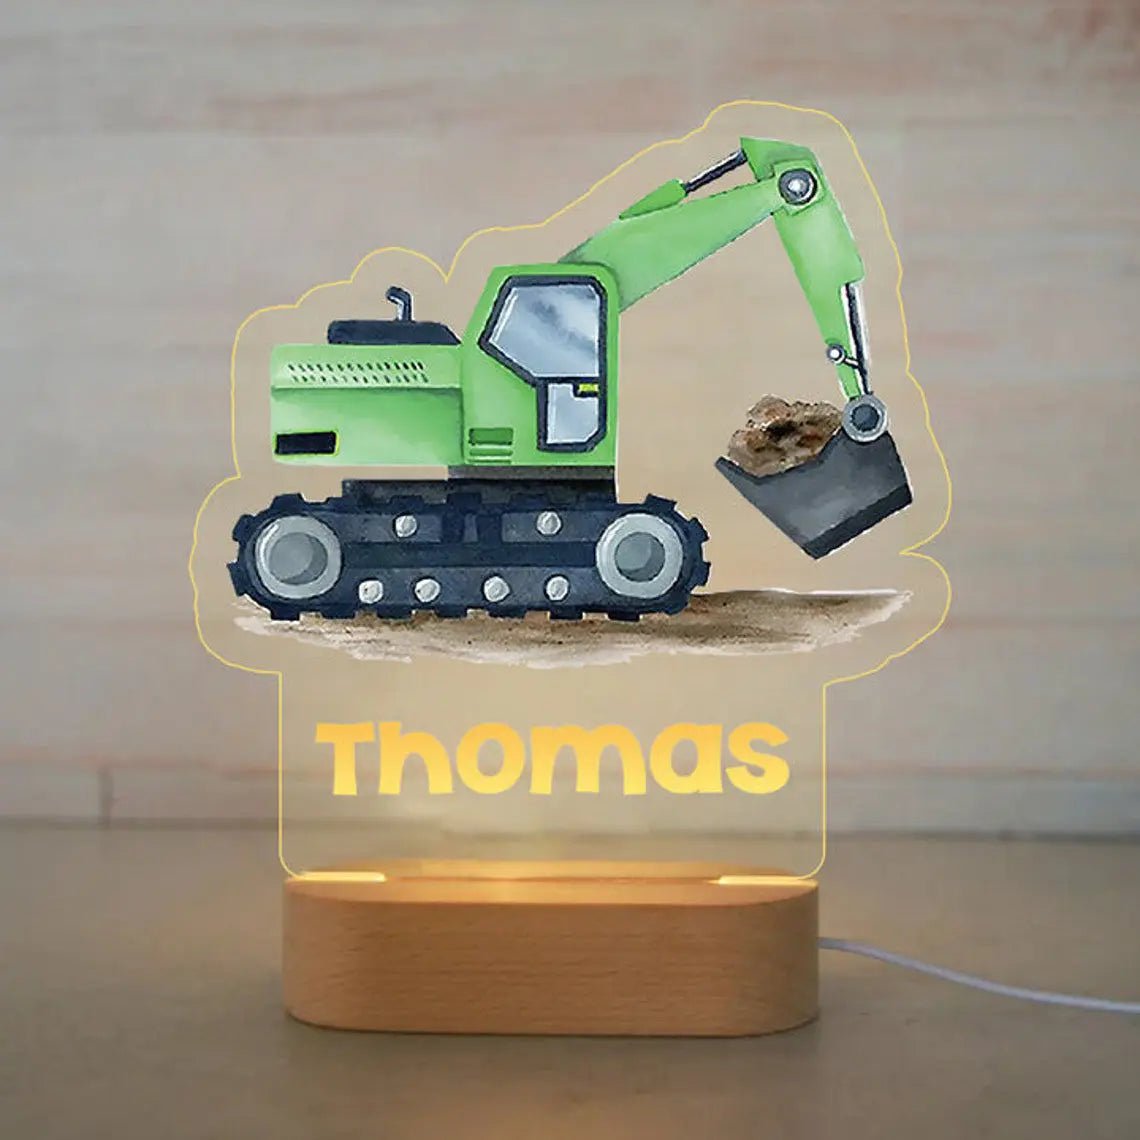 Customized Animal-themed Night Light for Kids - Personalized with Child's Name, Acrylic Lamp for Bedroom Decor Warm Light / 28Green Truck